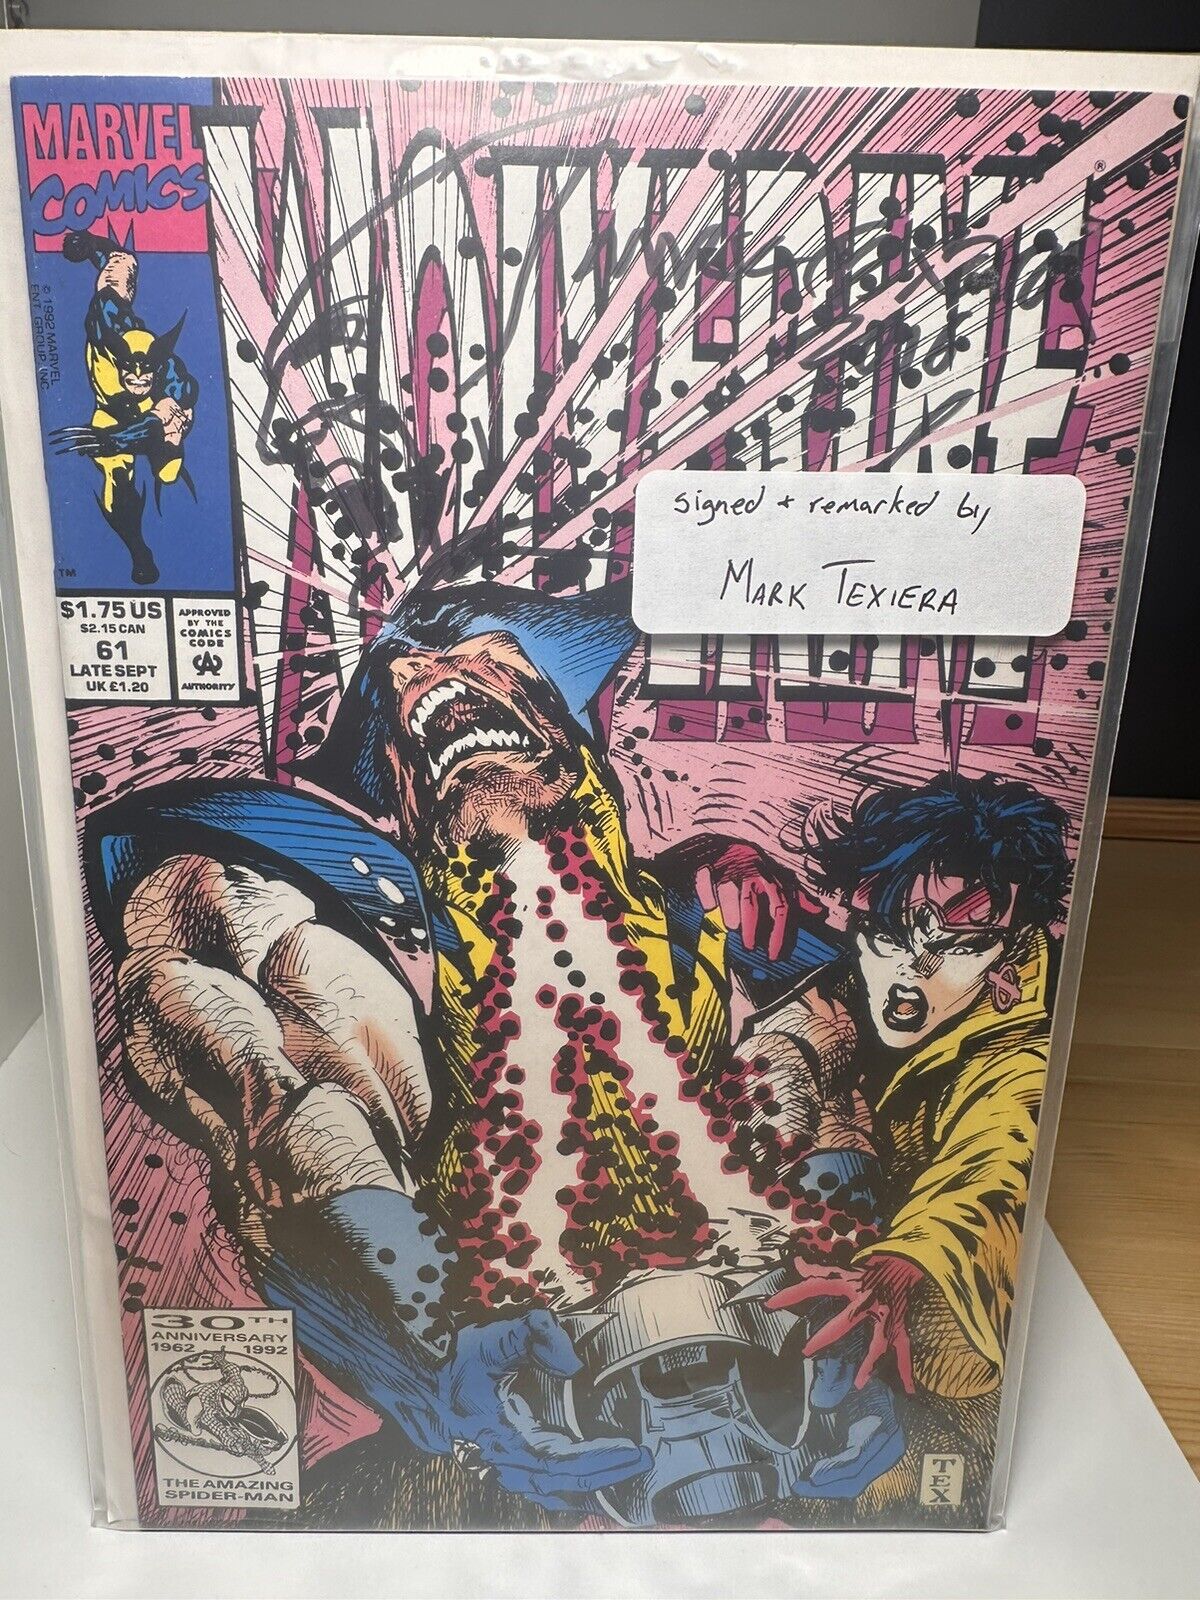 WOLVERINE #61 JUBILEE , SABRETOOTH , SIGNED BY ARTIST MARK TEXEIRA